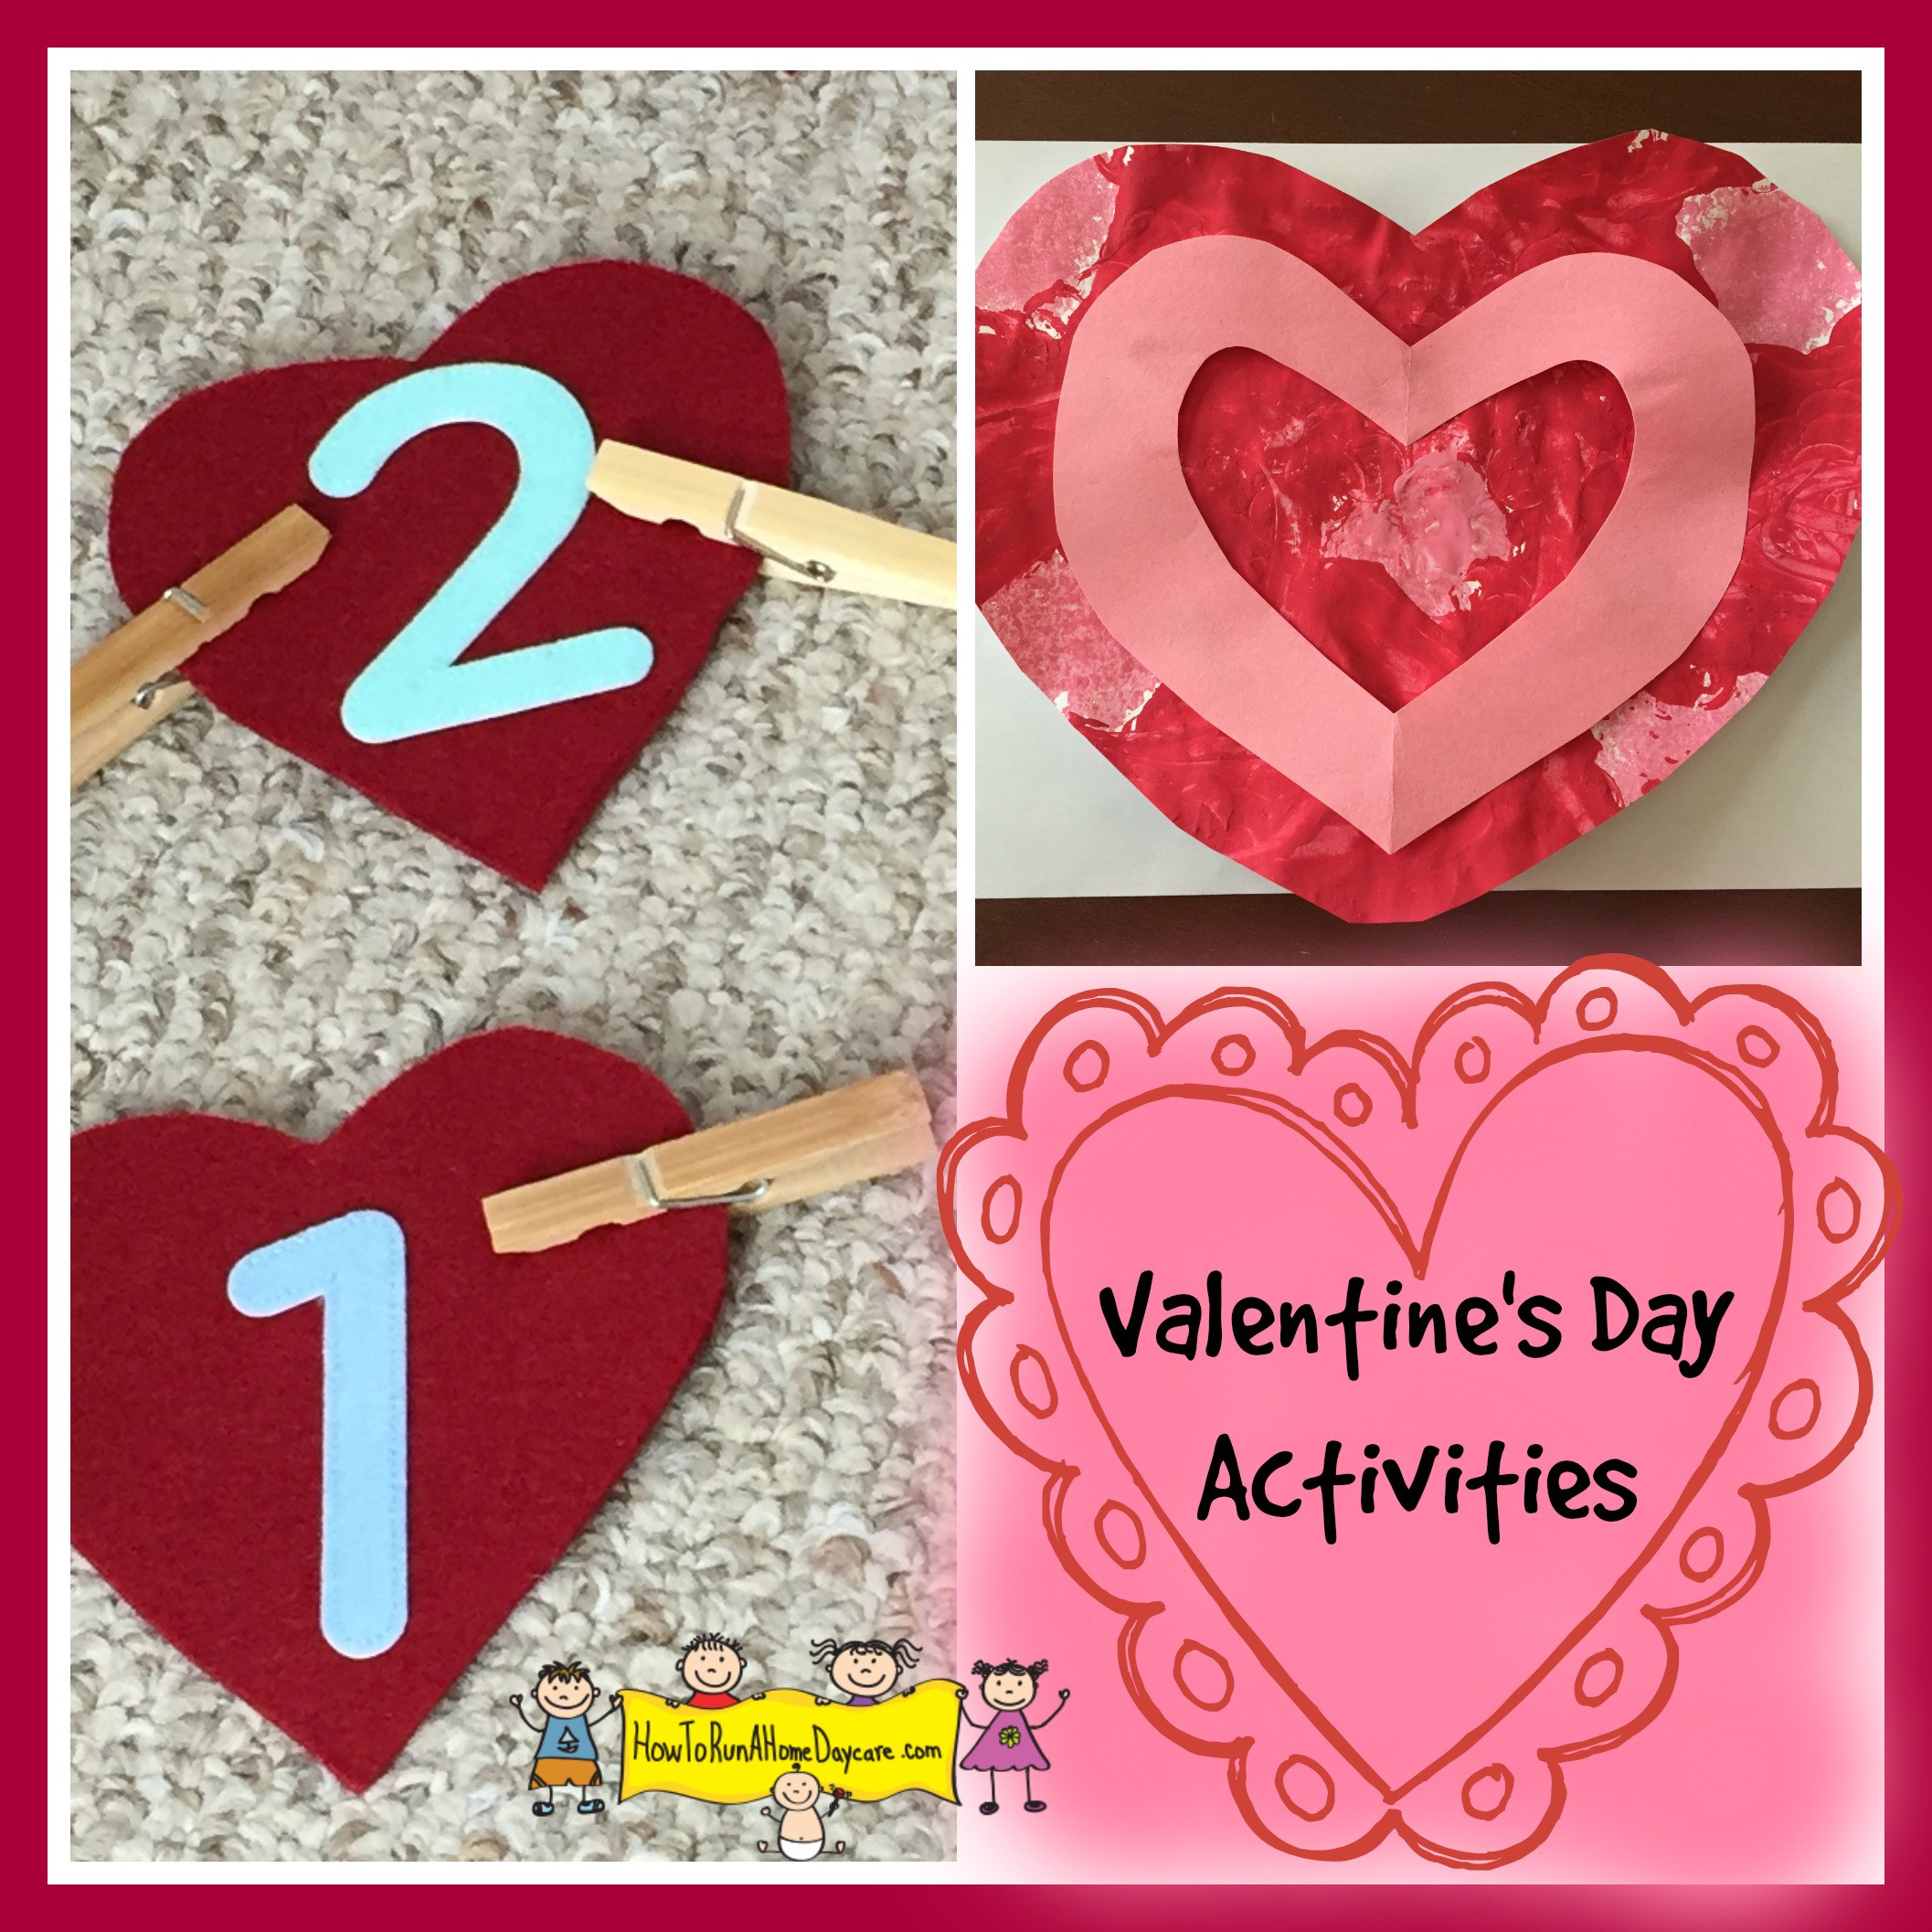 Valentines Day Events Ideas
 Valentine s Day Activities How To Run A Home Daycare